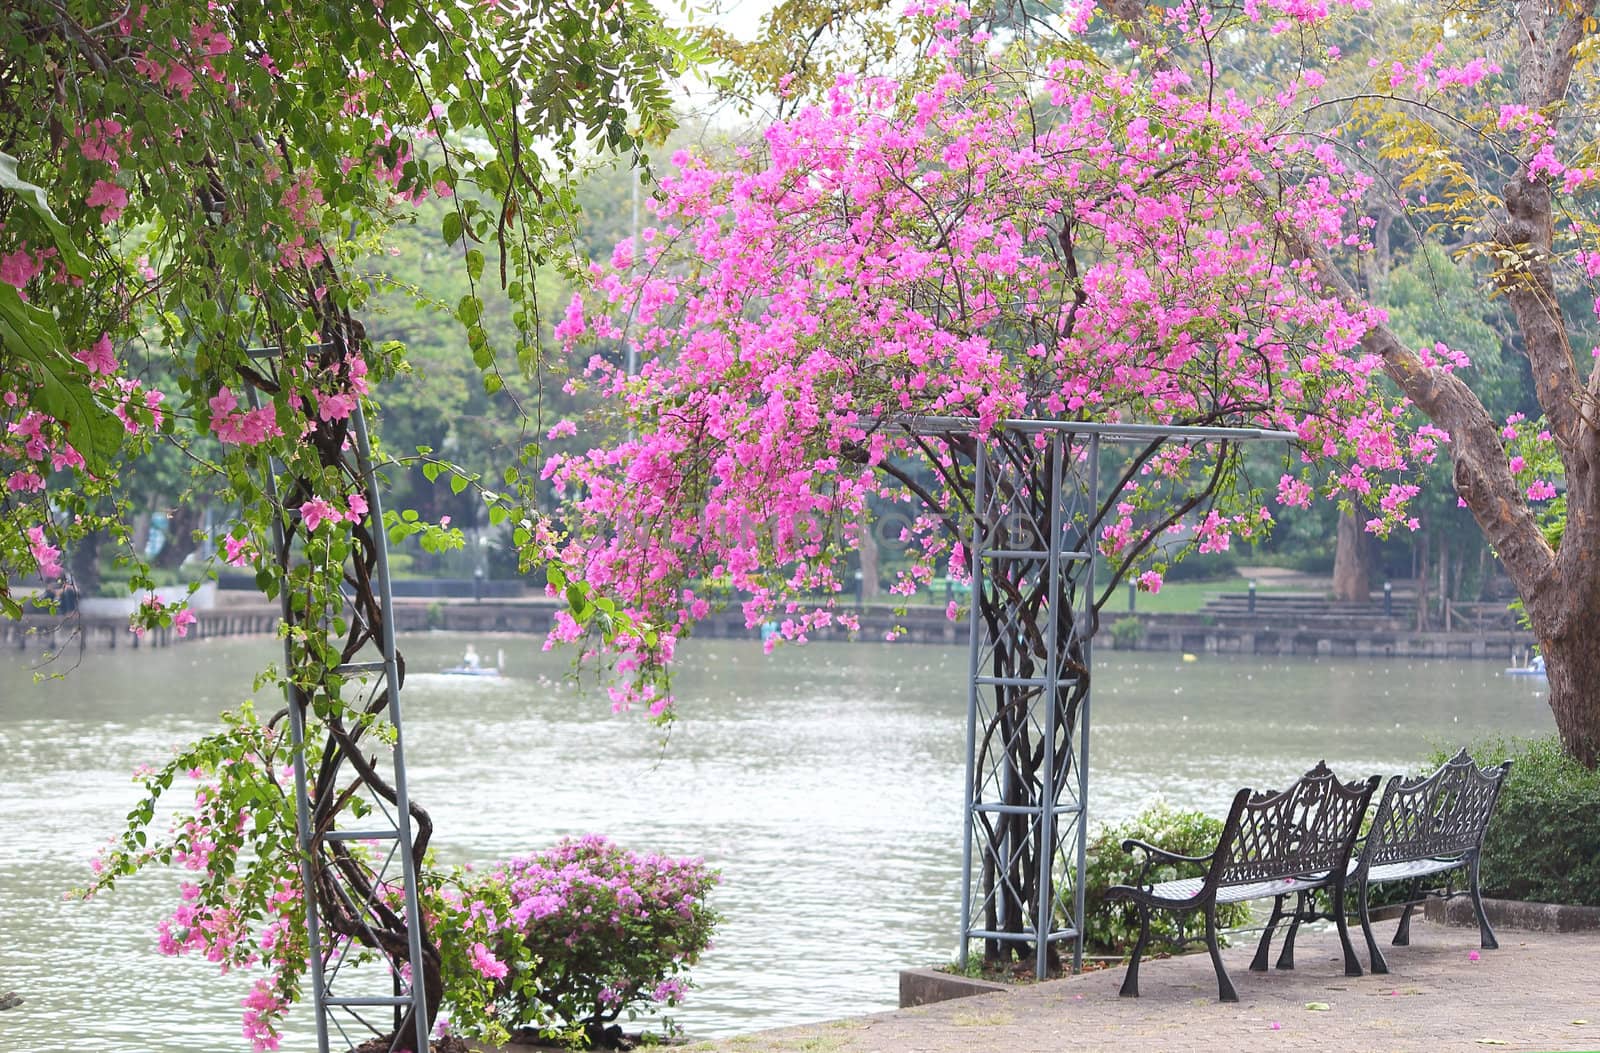 View of two chairs and beautiful bougainvillea flower in the park